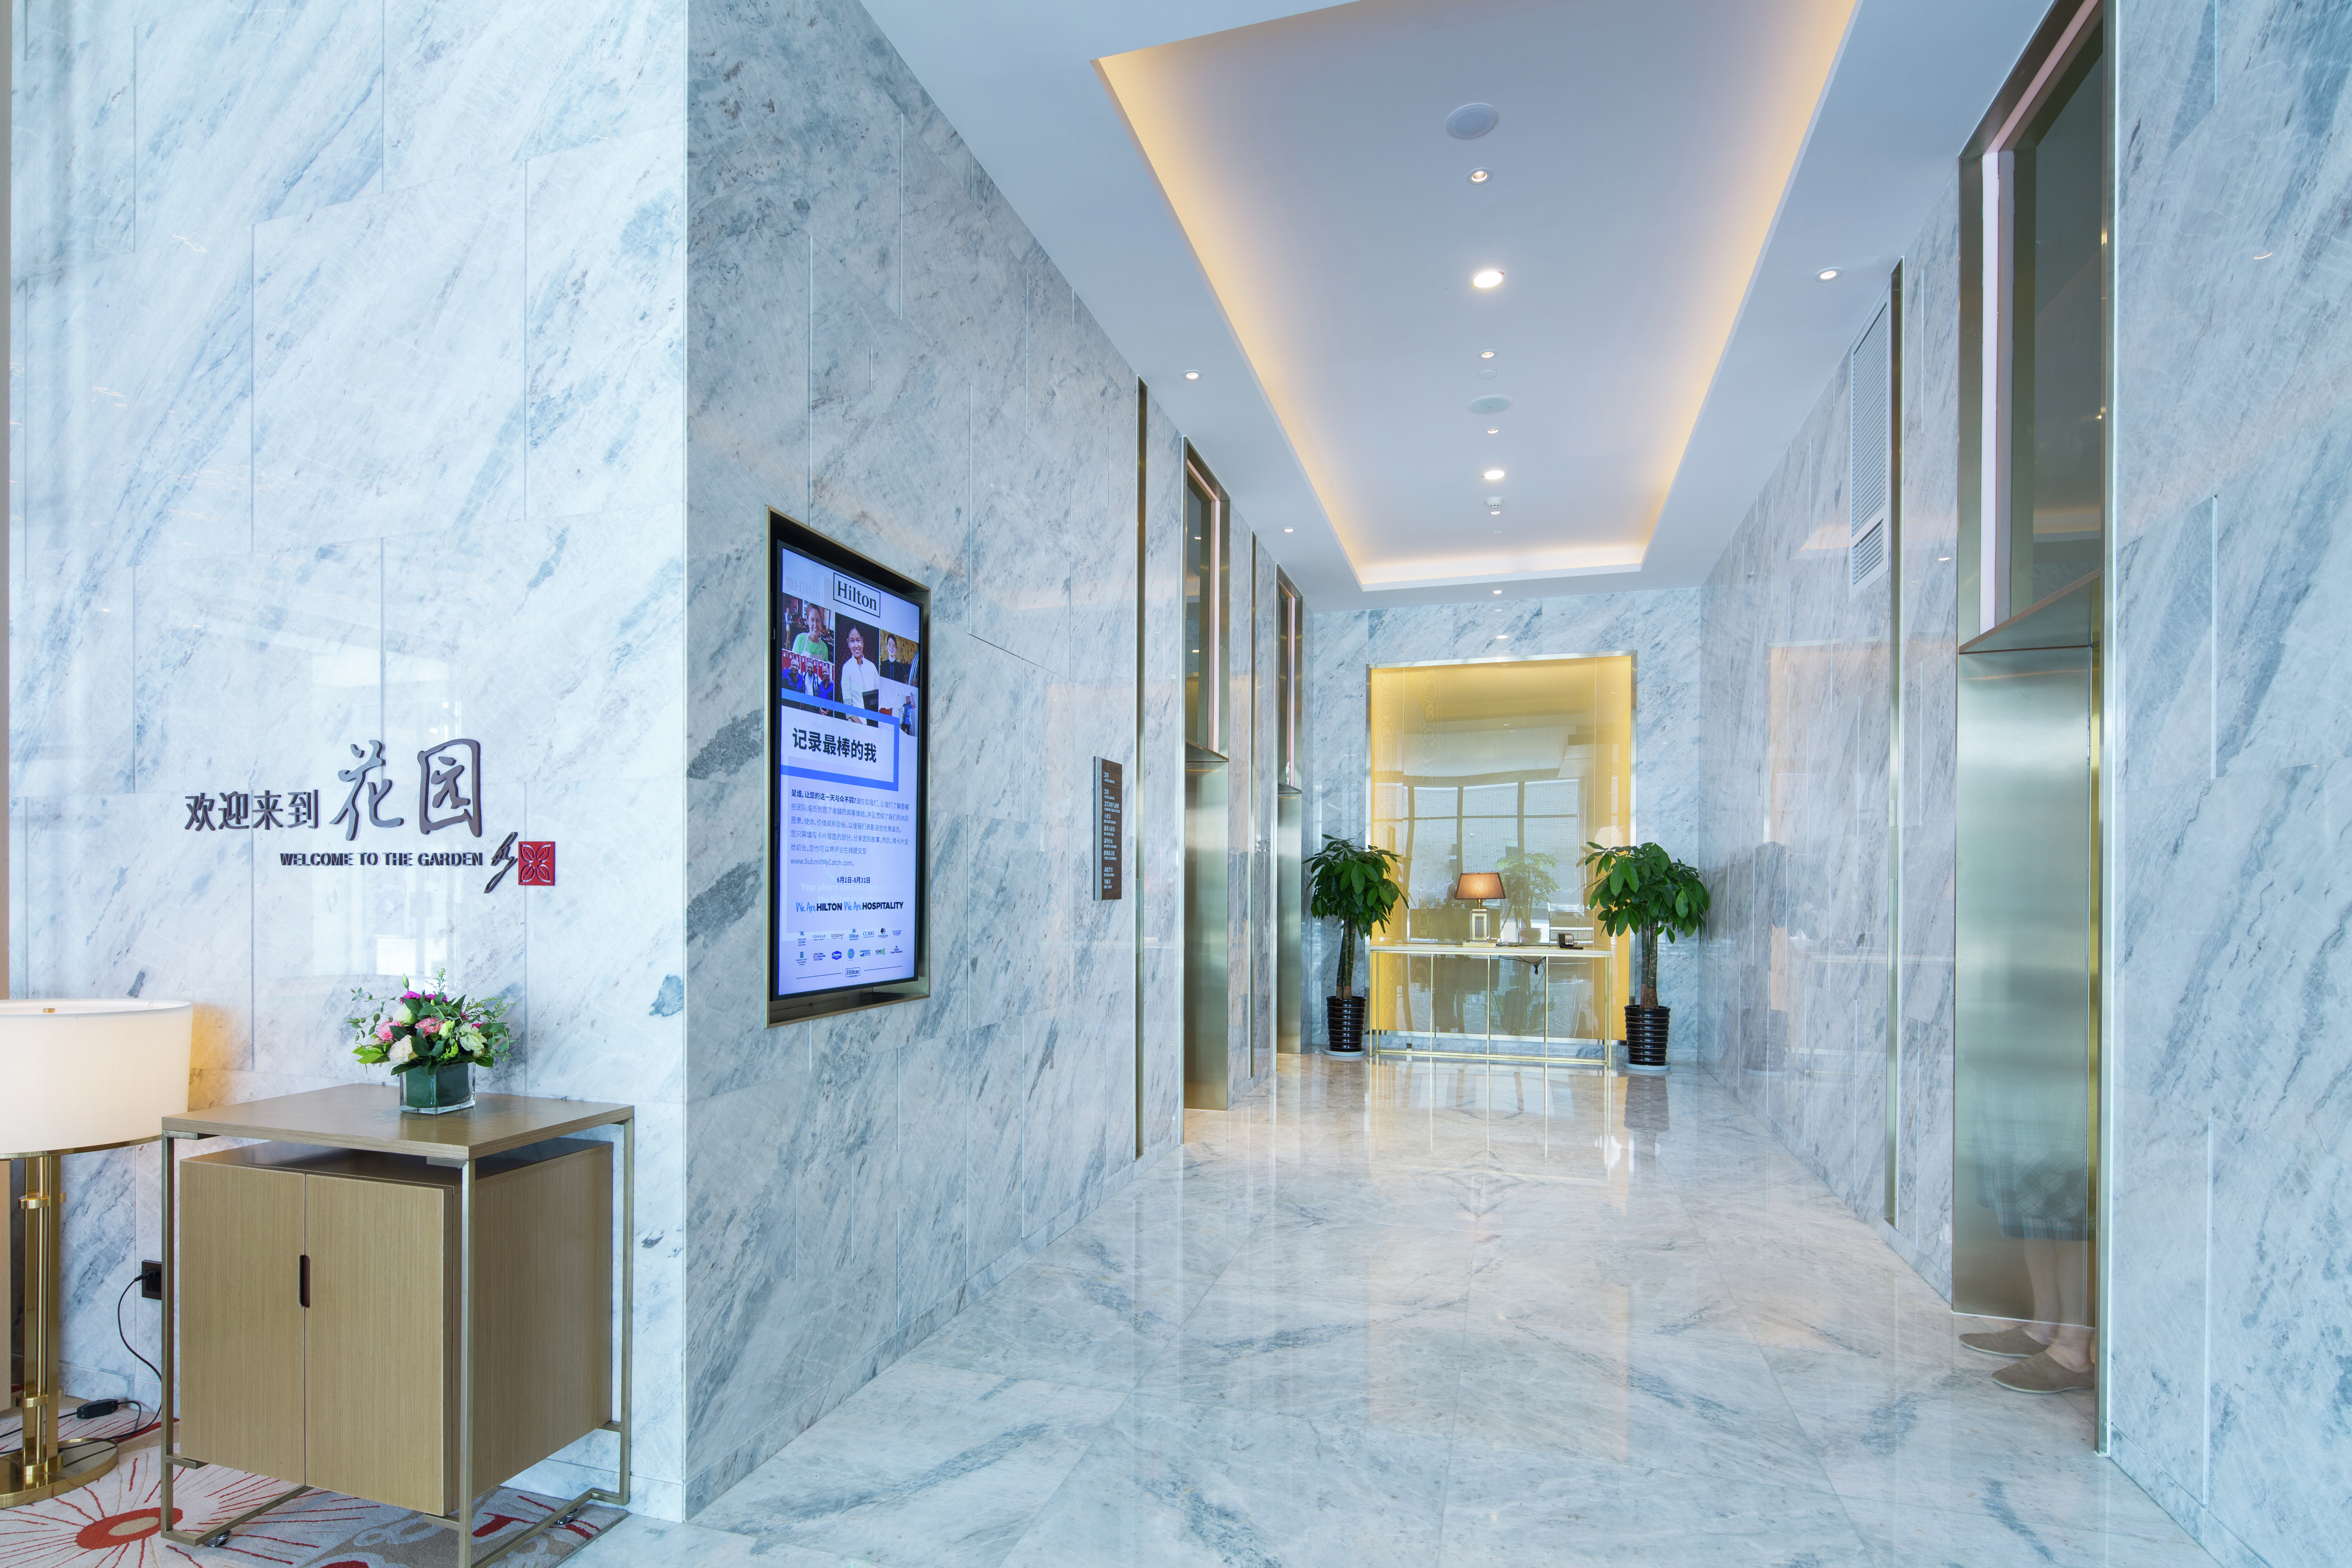 Hotel Lobby and Elevator to Guest Rooms